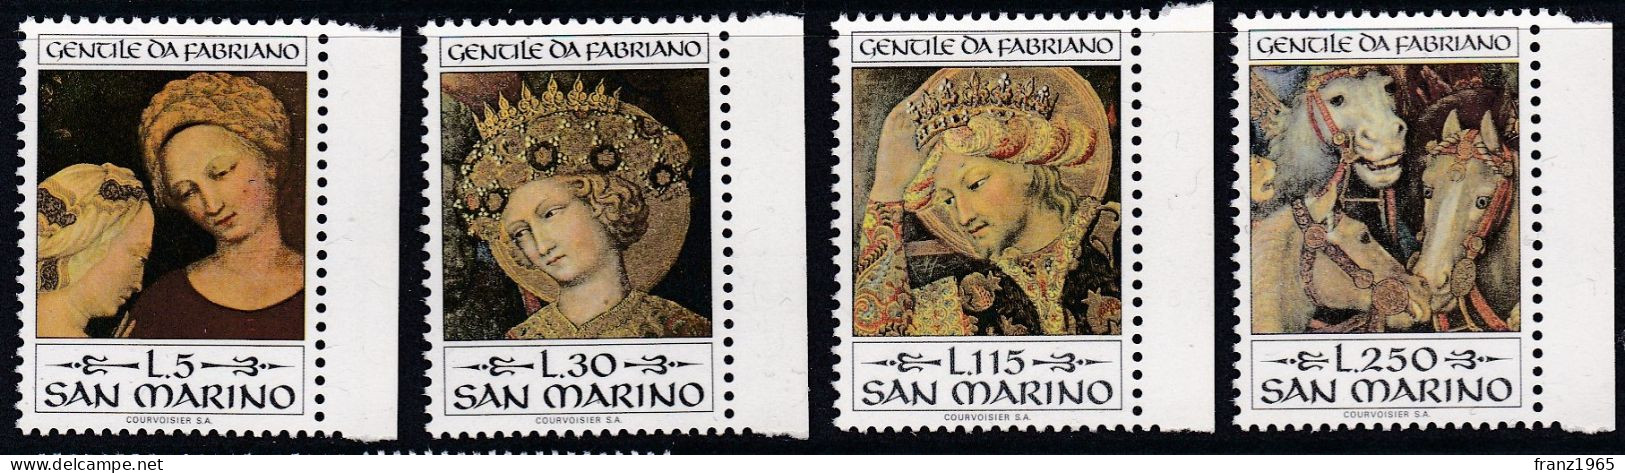 Fabriano Paintings - 1973 - Unused Stamps